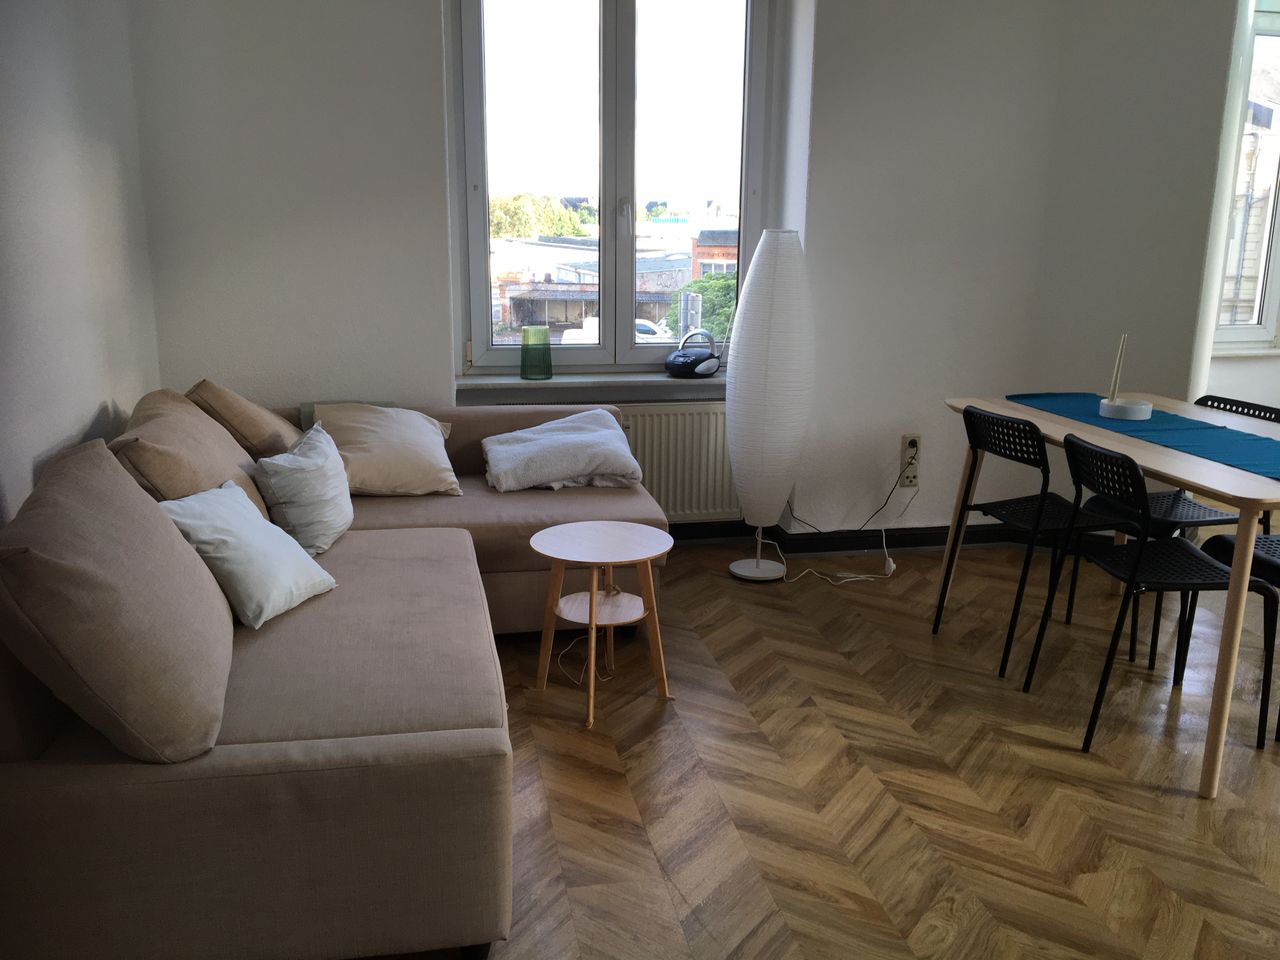 Amazing and cozy home in Magdeburg, centrally located, fully furnished